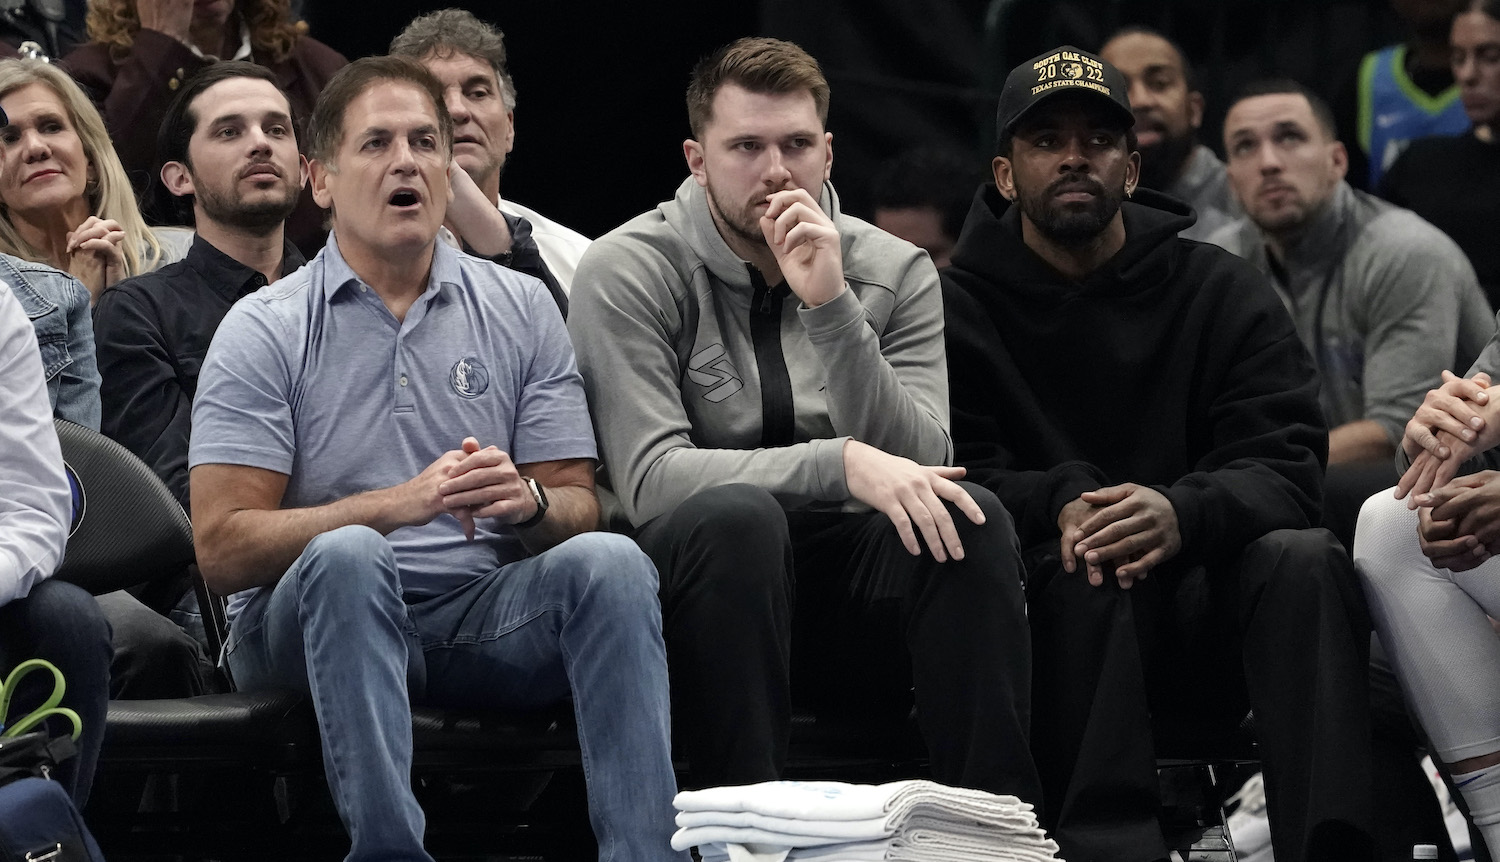 DALLAS, TEXAS - MARCH 13: (L-R) Dallas Mavericks owner Mark Cuban, Luka Doncic and Kyrie Irving watch first-half play against the Memphis Grizzlies at American Airlines Center on March 13, 2023 in Dallas, Texas. NOTE TO USER: User expressly acknowledges and agrees that, by downloading and/or using this Photograph, user is consenting to the terms and conditions of the Getty Images License Agreement. (Photo by Sam Hodde/Getty Images)